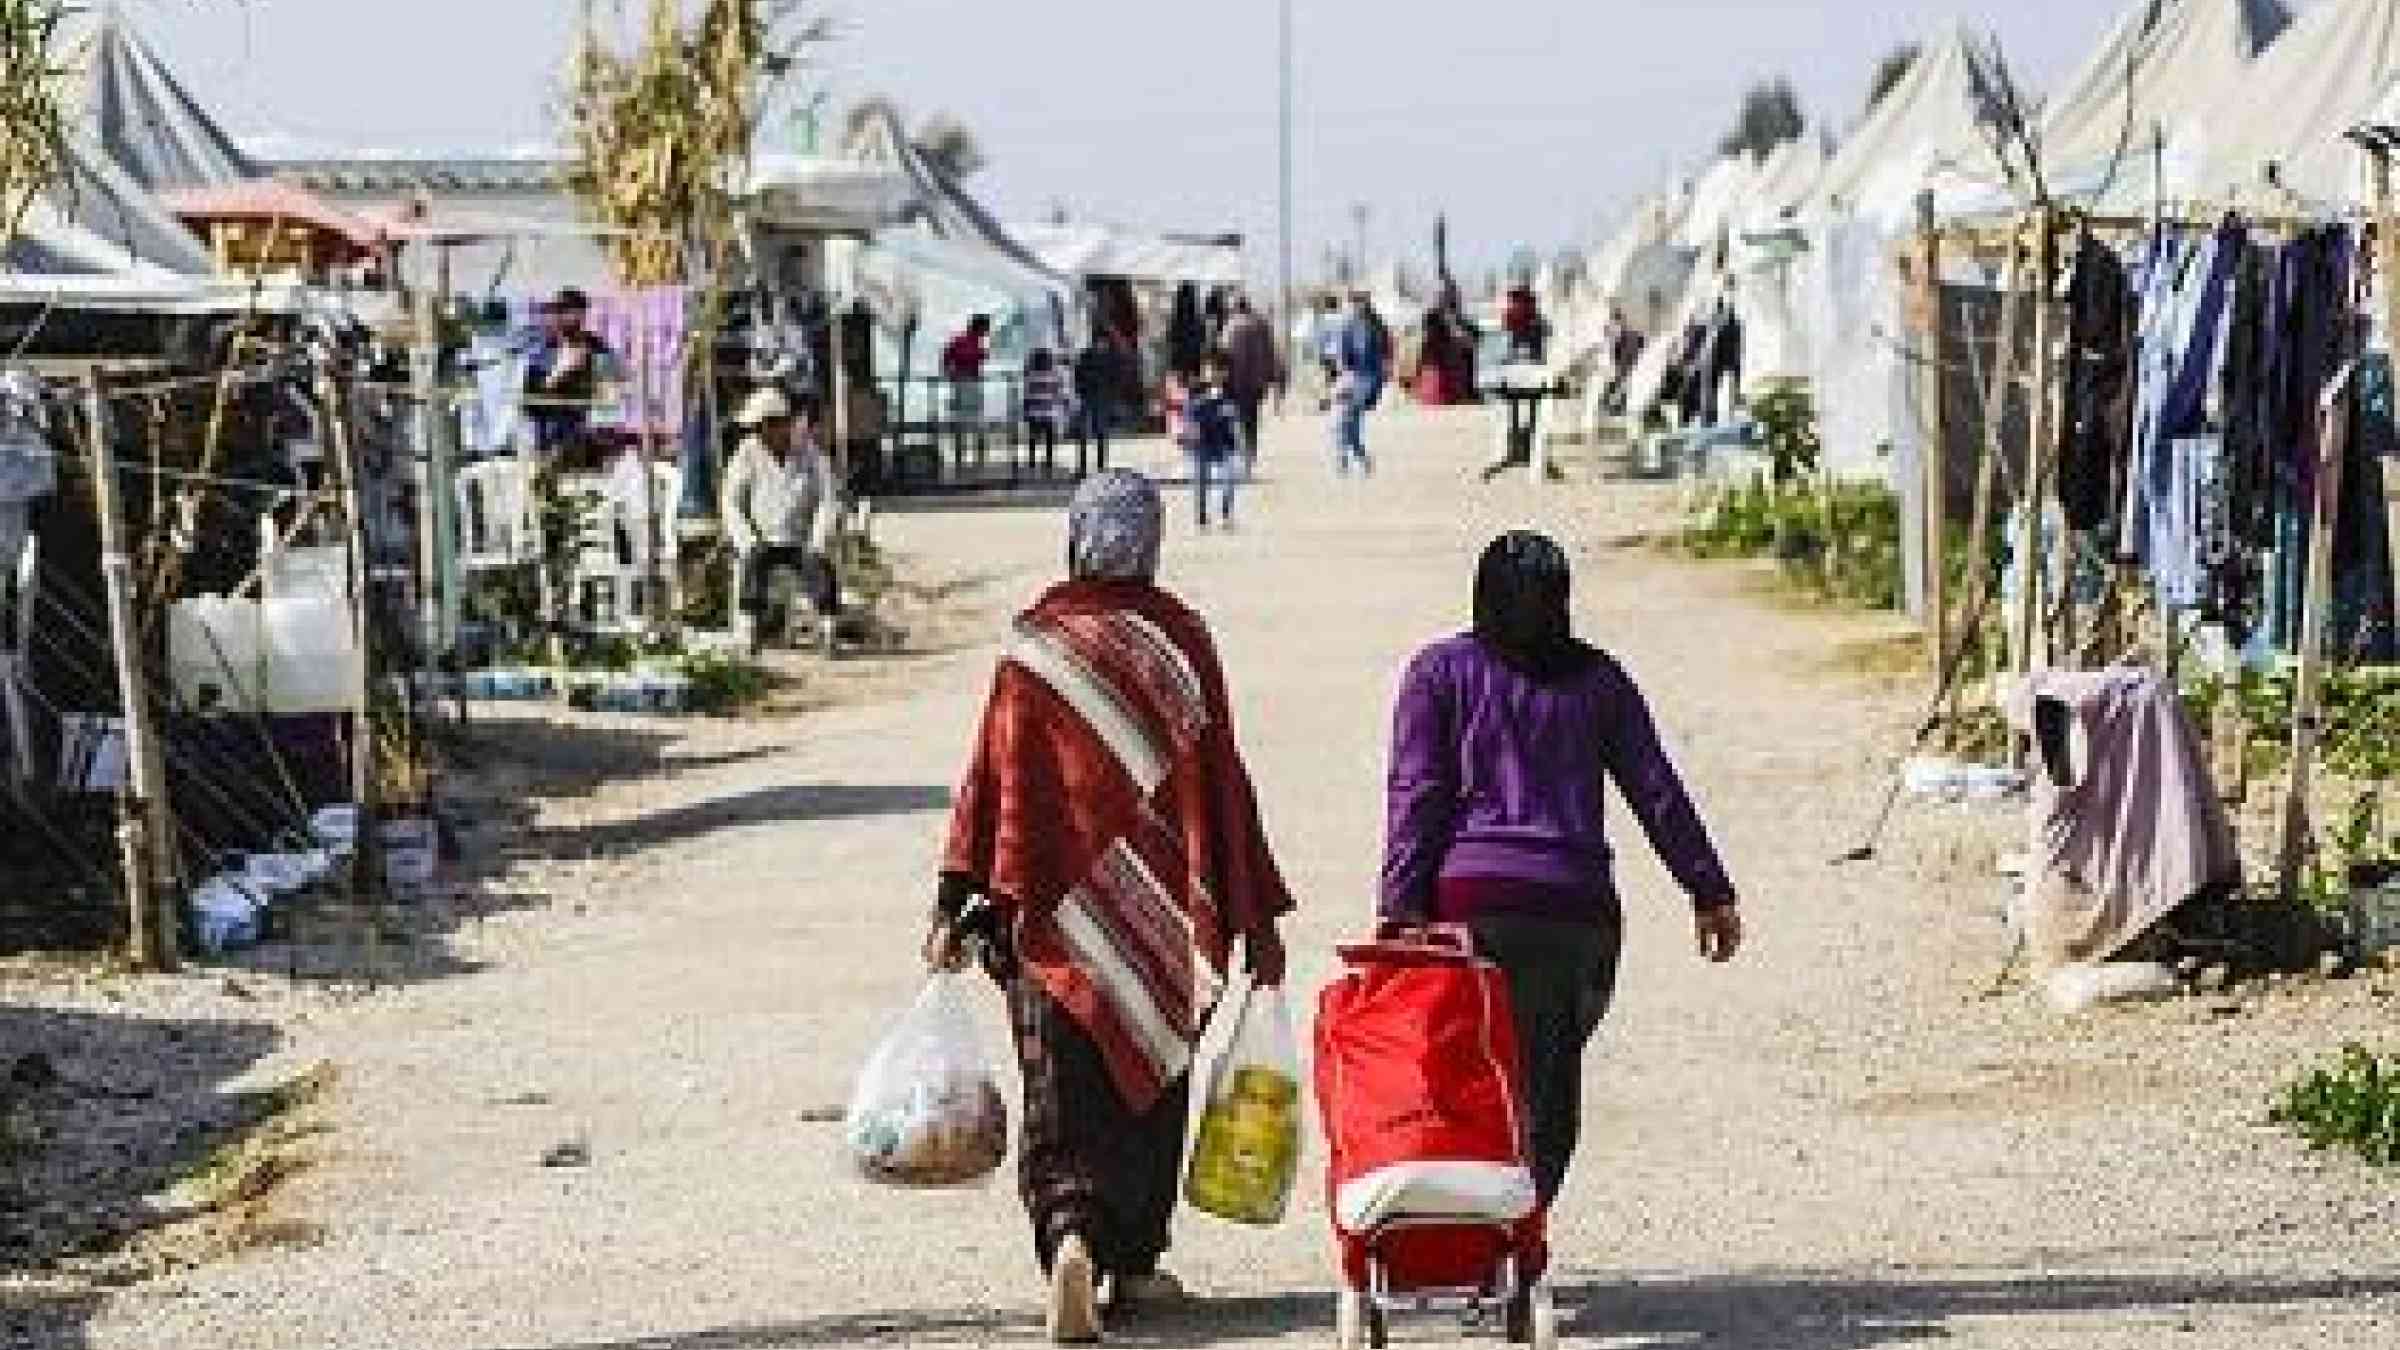 Turkey, host of the European Forum for Disaster Risk Reduction, has launched a programme to raise hazard awareness among the three million Syrians who have fled there (Photo: European Parliament)